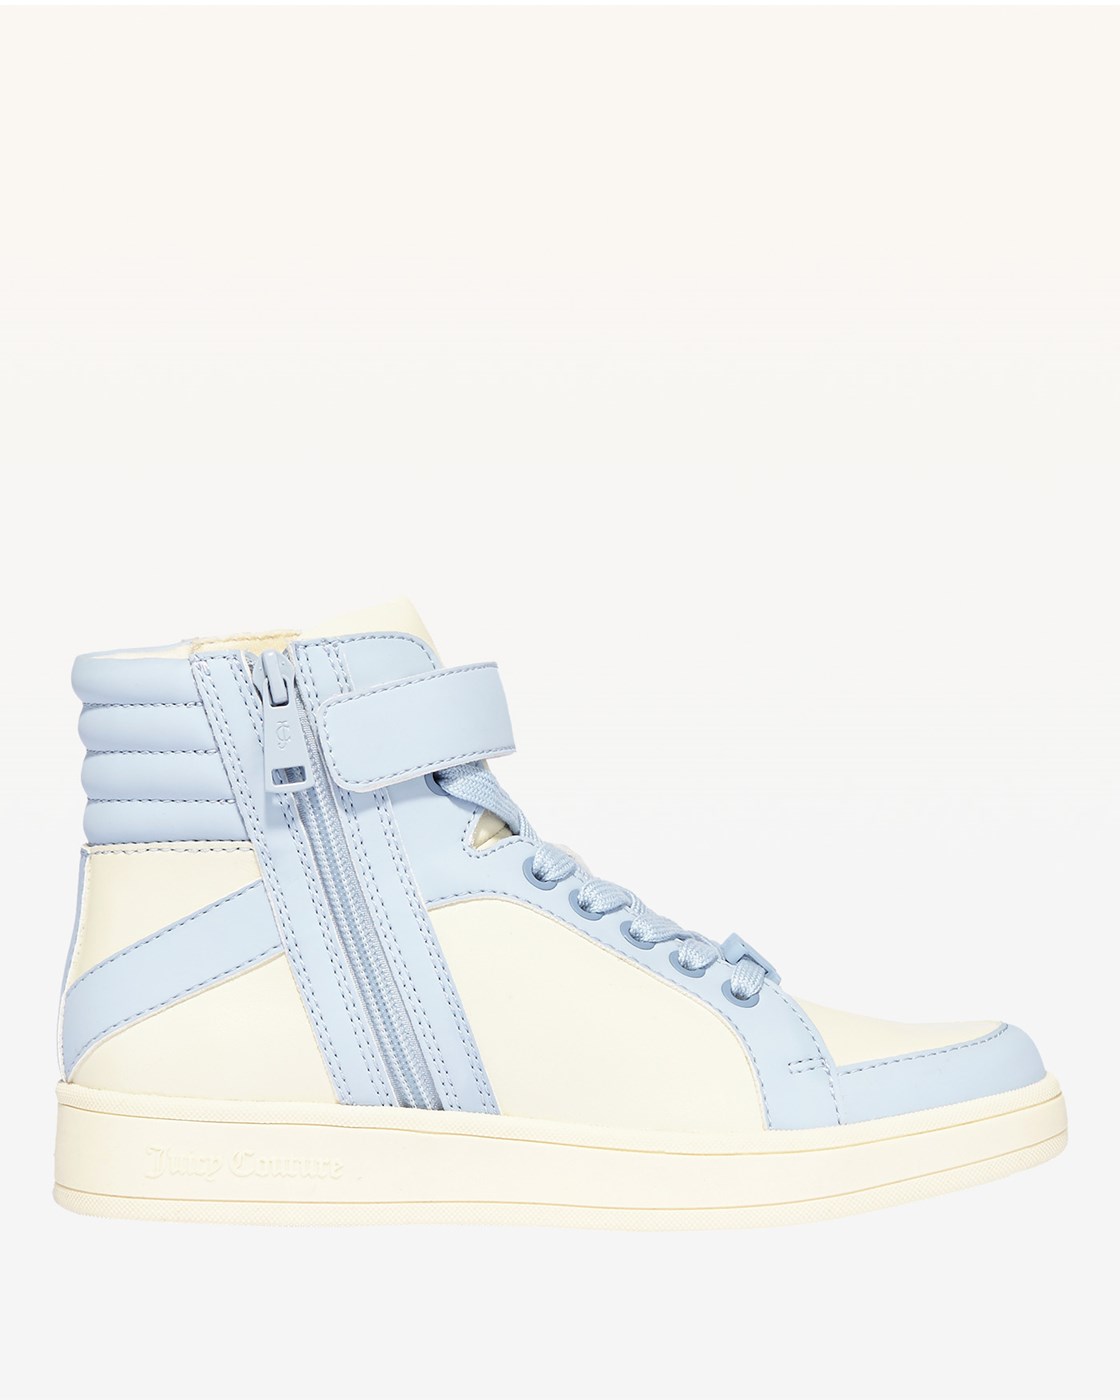 Juicy Couture Joss Leather High Top Sneaker